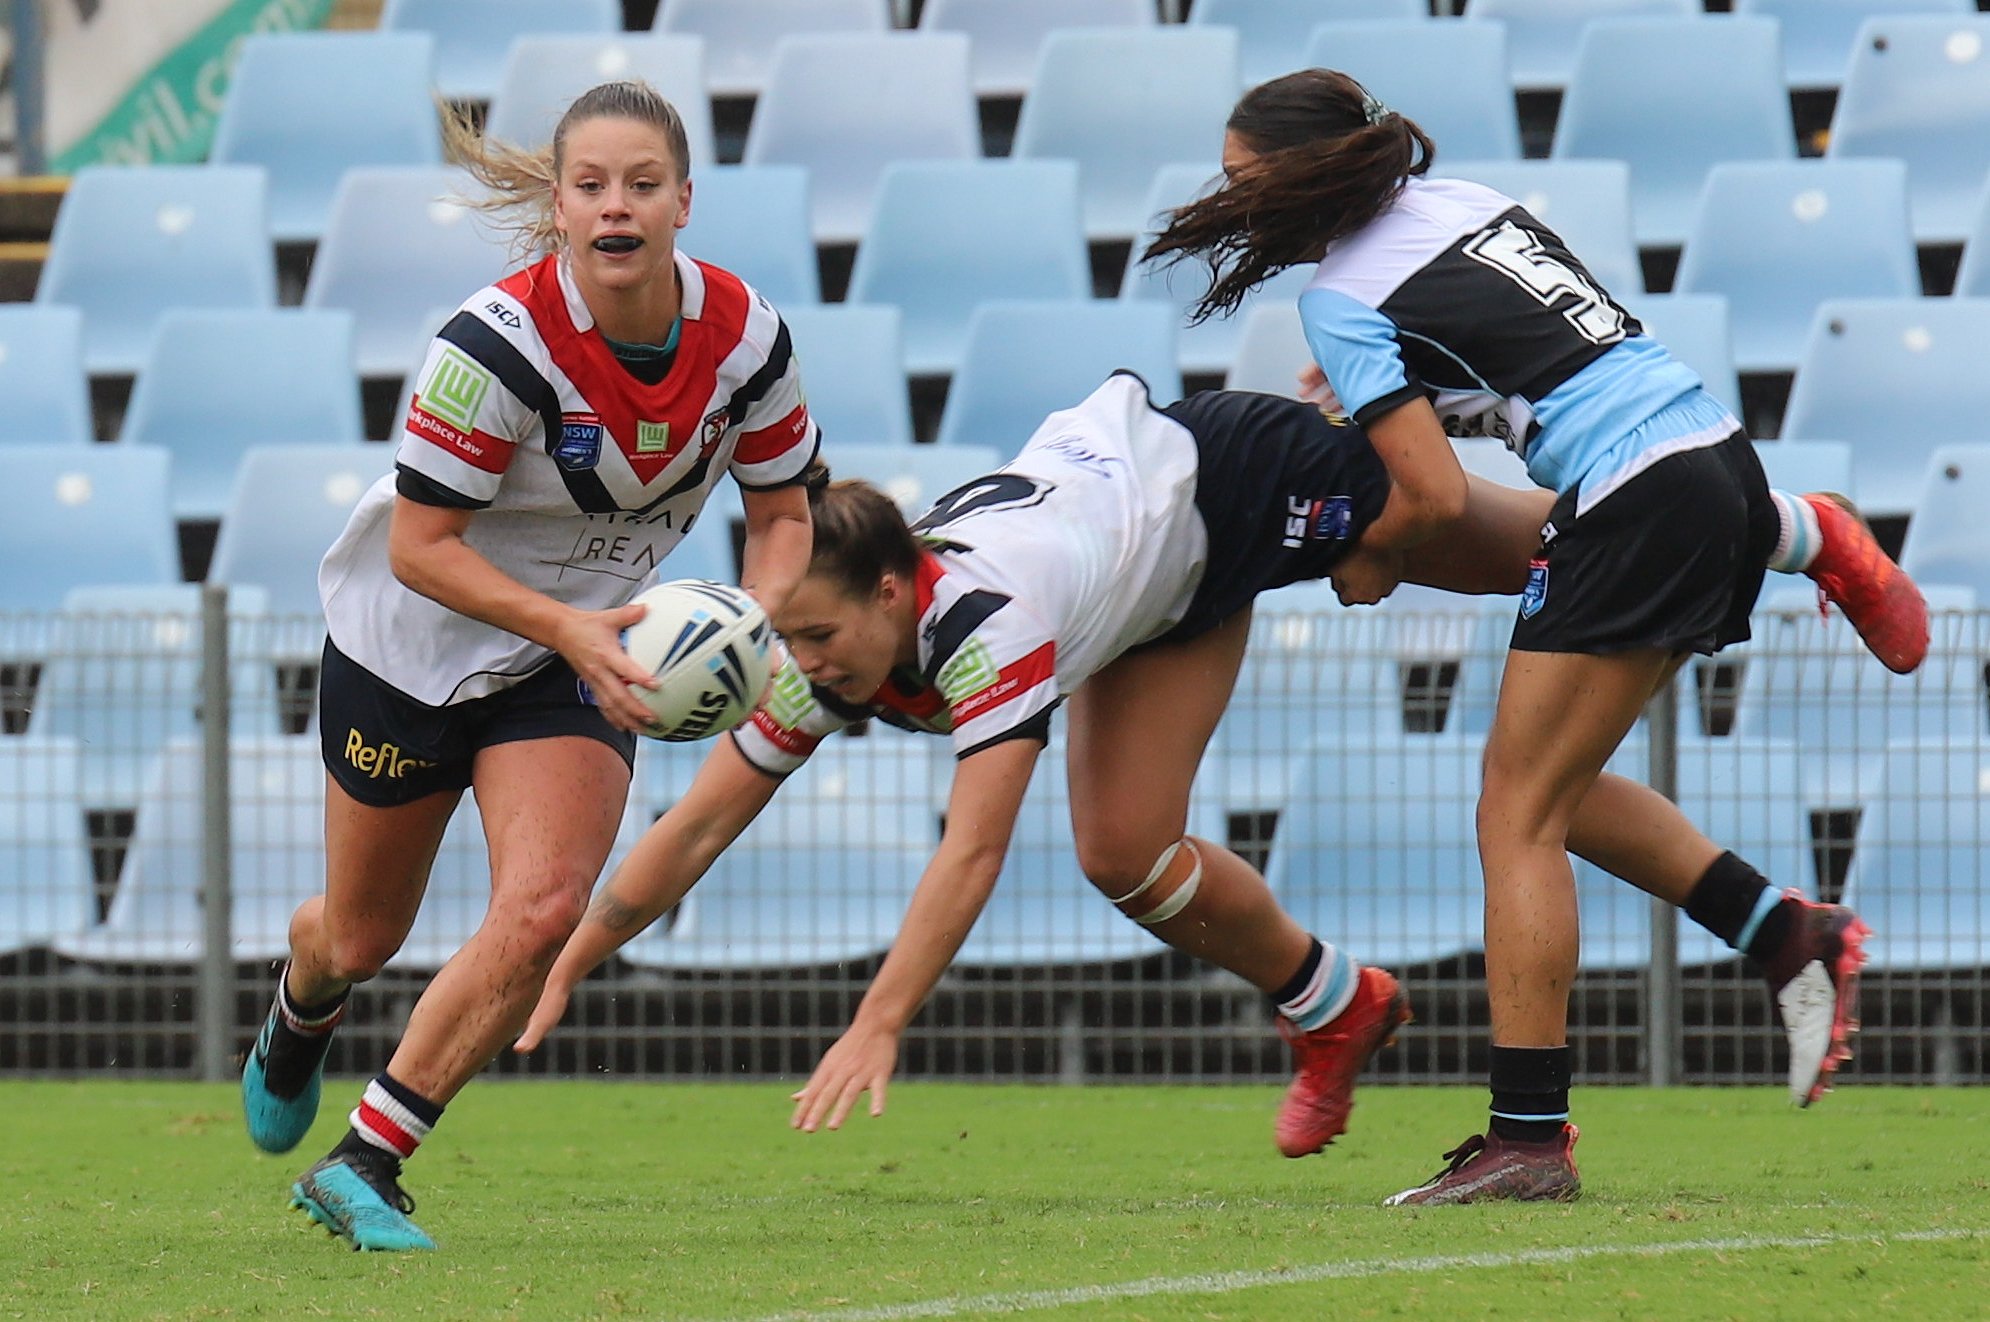 CC Roosters & the North Sydney Bears will battle it out in the 2020 NSWRL Harvey Norman Women's Premiership Grand Final at Bankwest Stadium in 2 weeks (Photo : Steve Montgomery)